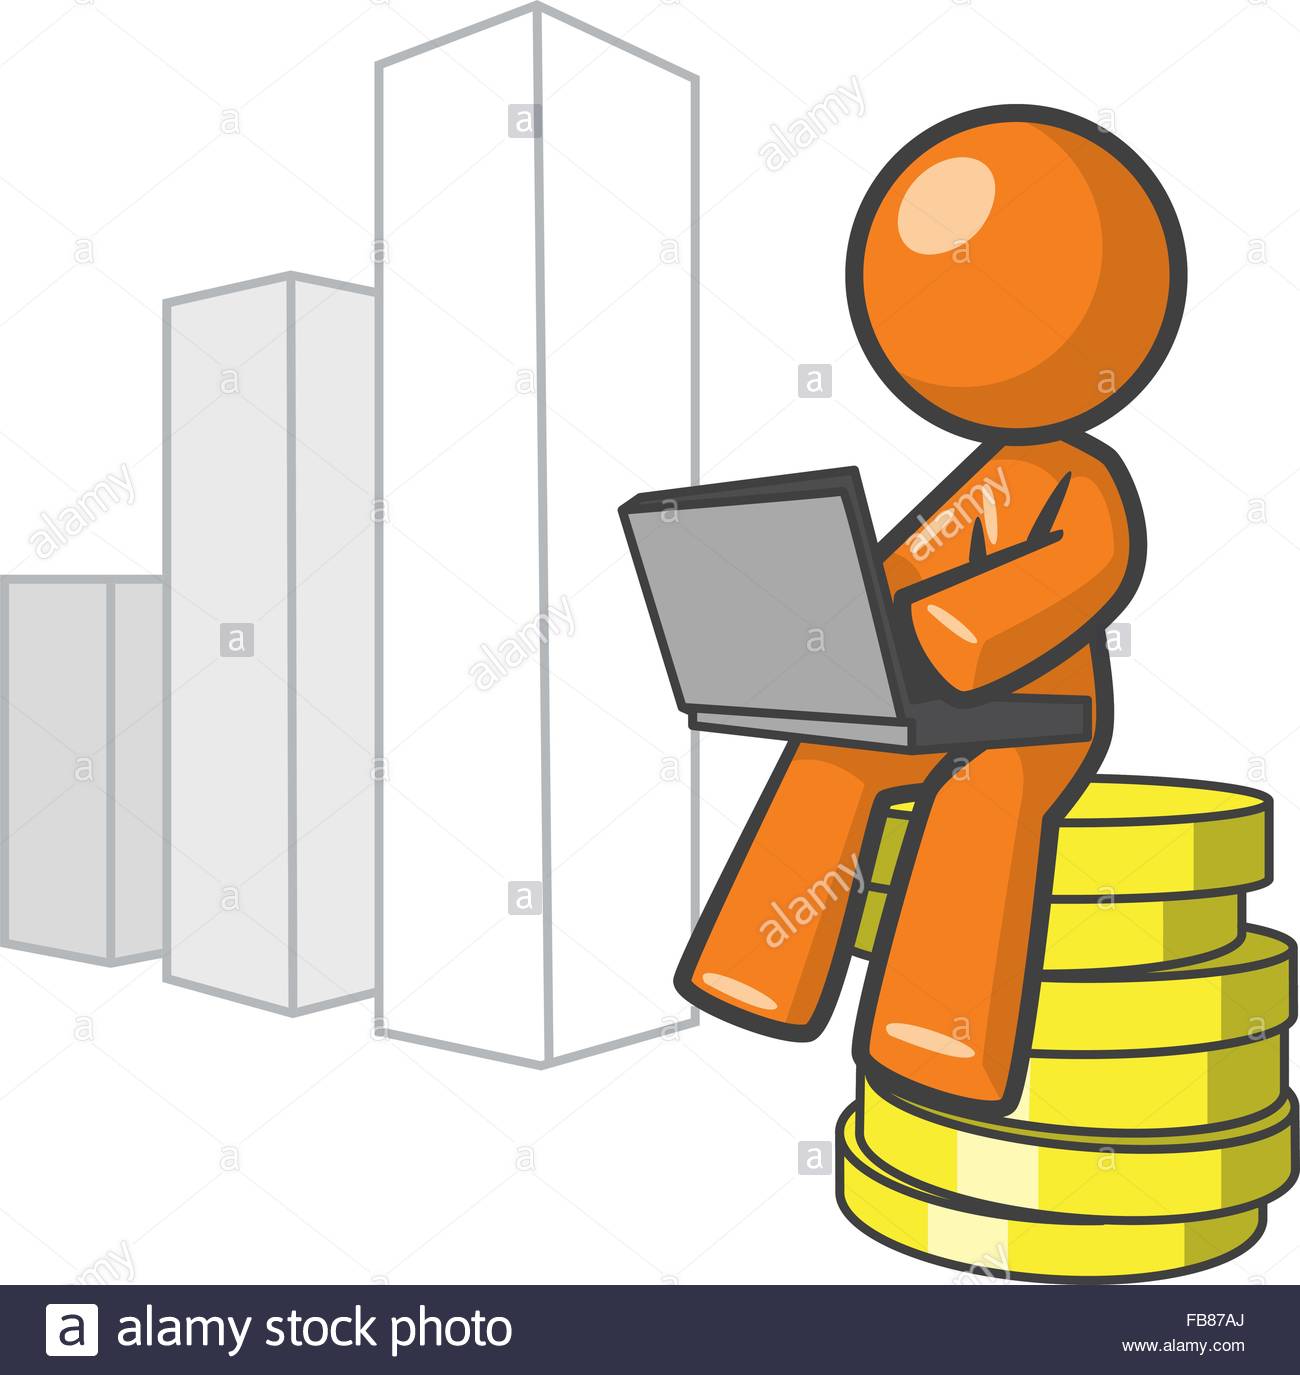 Orange person sitting on money, with giant bar graph rising in background.